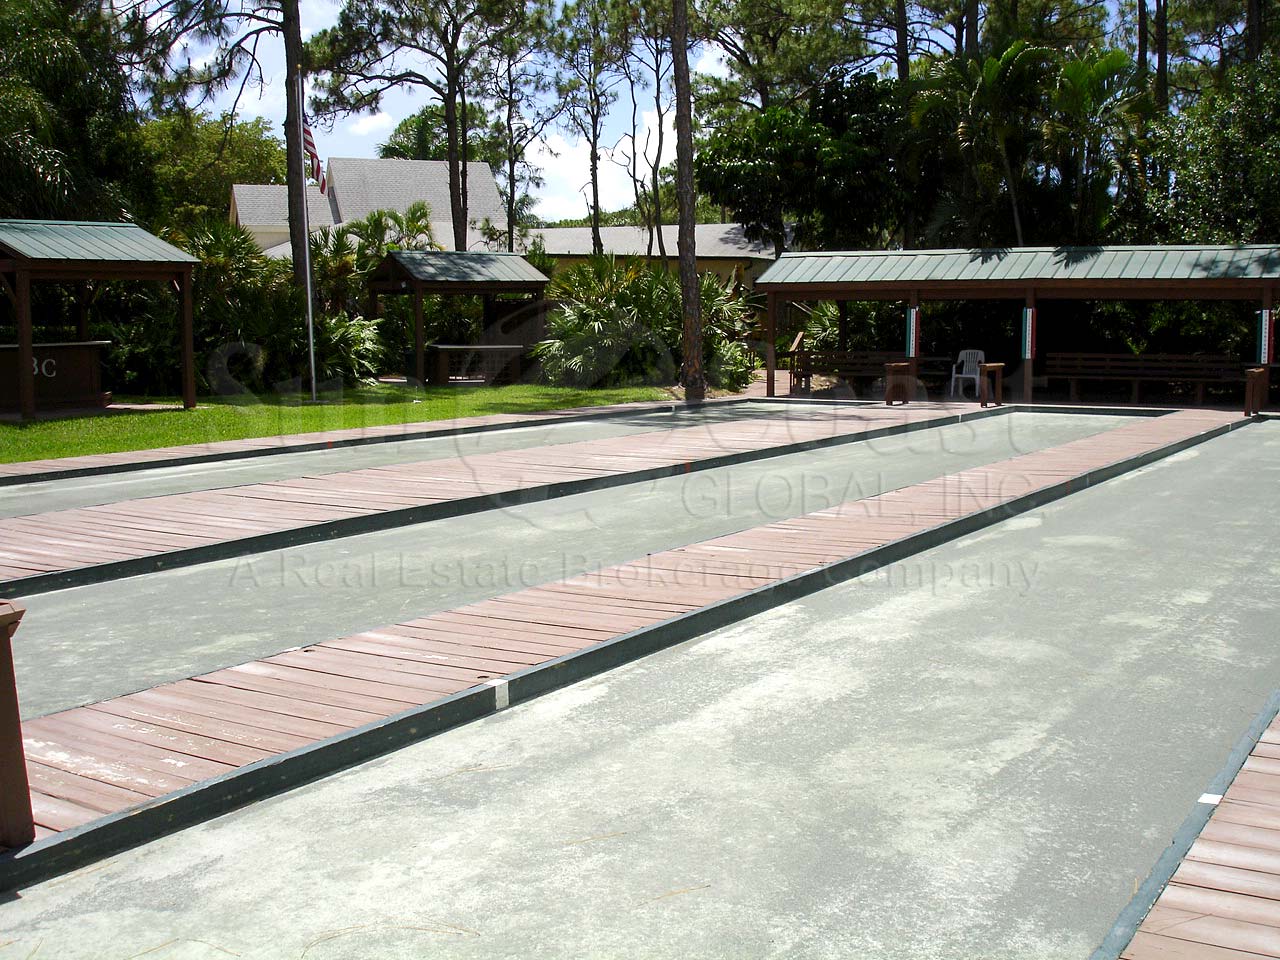 BAY FOREST Bocce Ball Courts